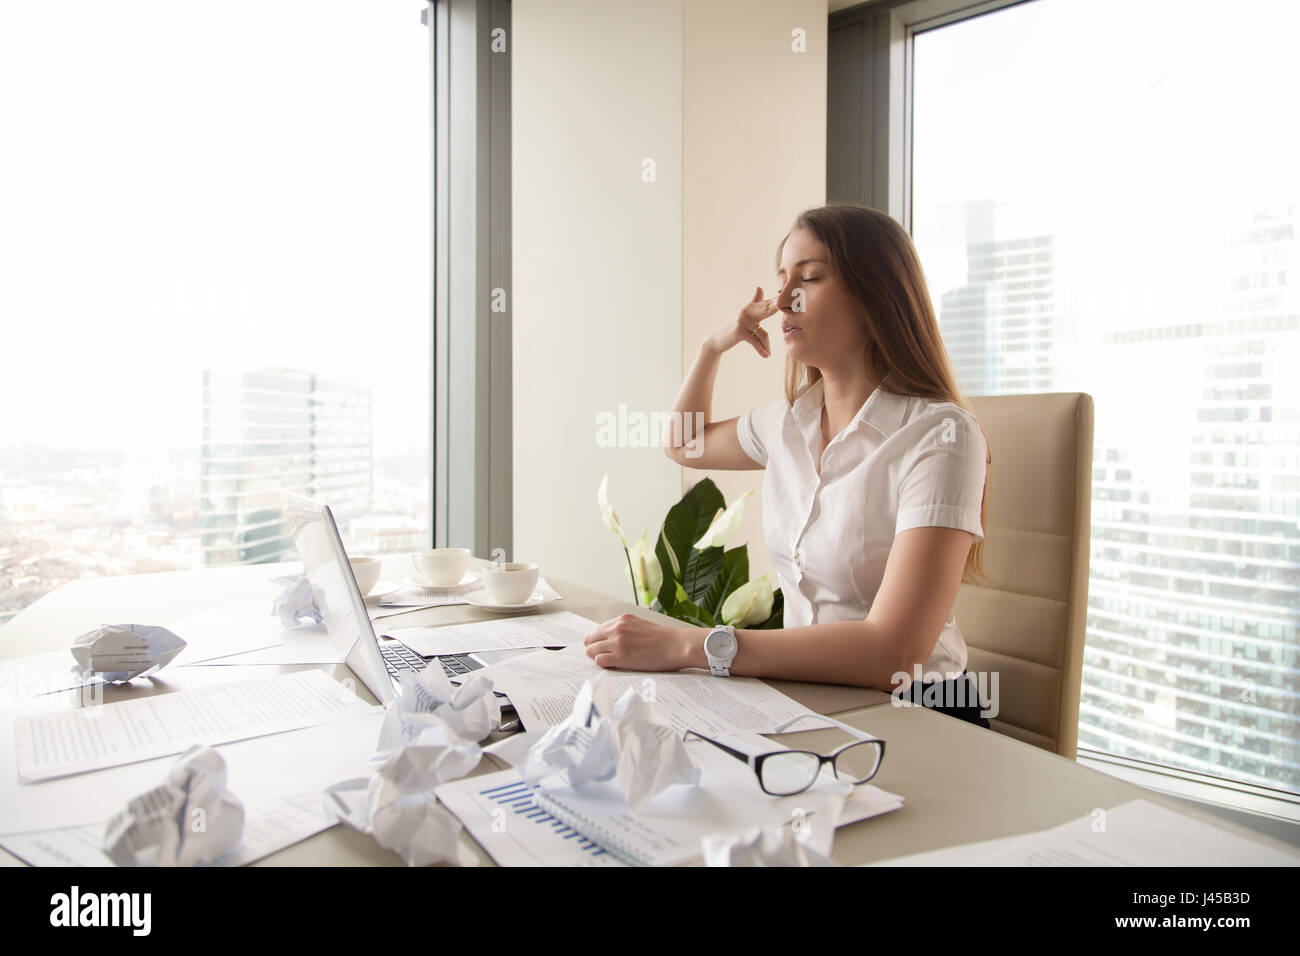 Tired businesswoman want kill herself at workplace Stock Photo